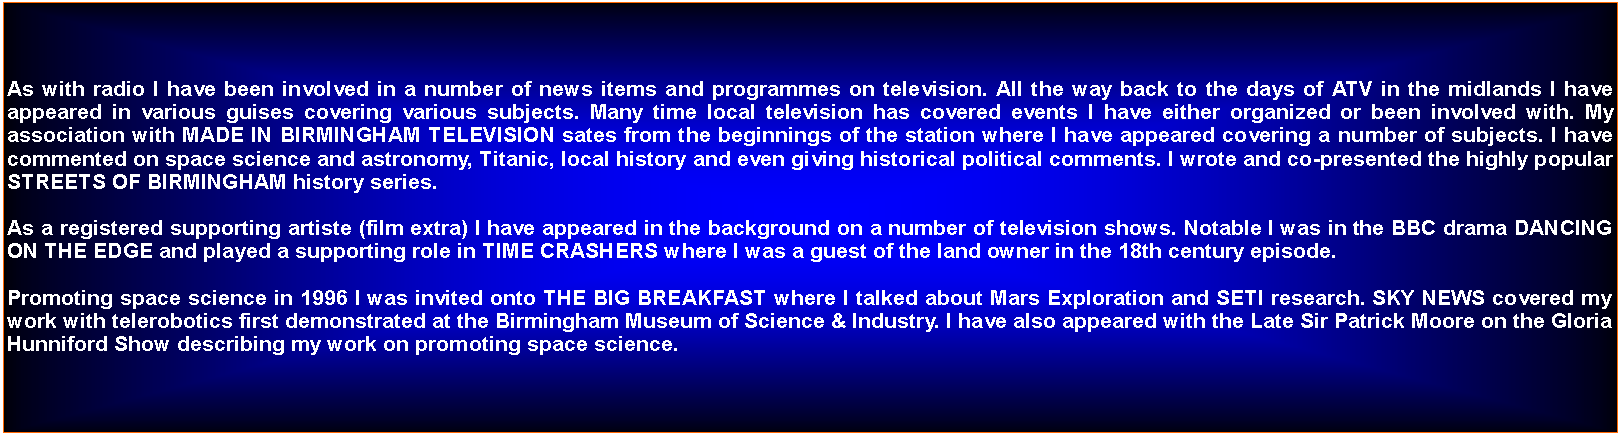 Text Box: As with radio I have been involved in a number of news items and programmes on television. All the way back to the days of ATV in the midlands I have appeared in various guises covering various subjects. Many time local television has covered events I have either organized or been involved with. My association with MADE IN BIRMINGHAM TELEVISION sates from the beginnings of the station where I have appeared covering a number of subjects. I have commented on space science and astronomy, Titanic, local history and even giving historical political comments. I wrote and co-presented the highly popular STREETS OF BIRMINGHAM history series.As a registered supporting artiste (film extra) I have appeared in the background on a number of television shows. Notable I was in the BBC drama DANCING ON THE EDGE and played a supporting role in TIME CRASHERS where I was a guest of the land owner in the 18th century episode. Promoting space science in 1996 I was invited onto THE BIG BREAKFAST where I talked about Mars Exploration and SETI research. SKY NEWS covered my work with telerobotics first demonstrated at the Birmingham Museum of Science & Industry. I have also appeared with the Late Sir Patrick Moore on the Gloria Hunniford Show describing my work on promoting space science.